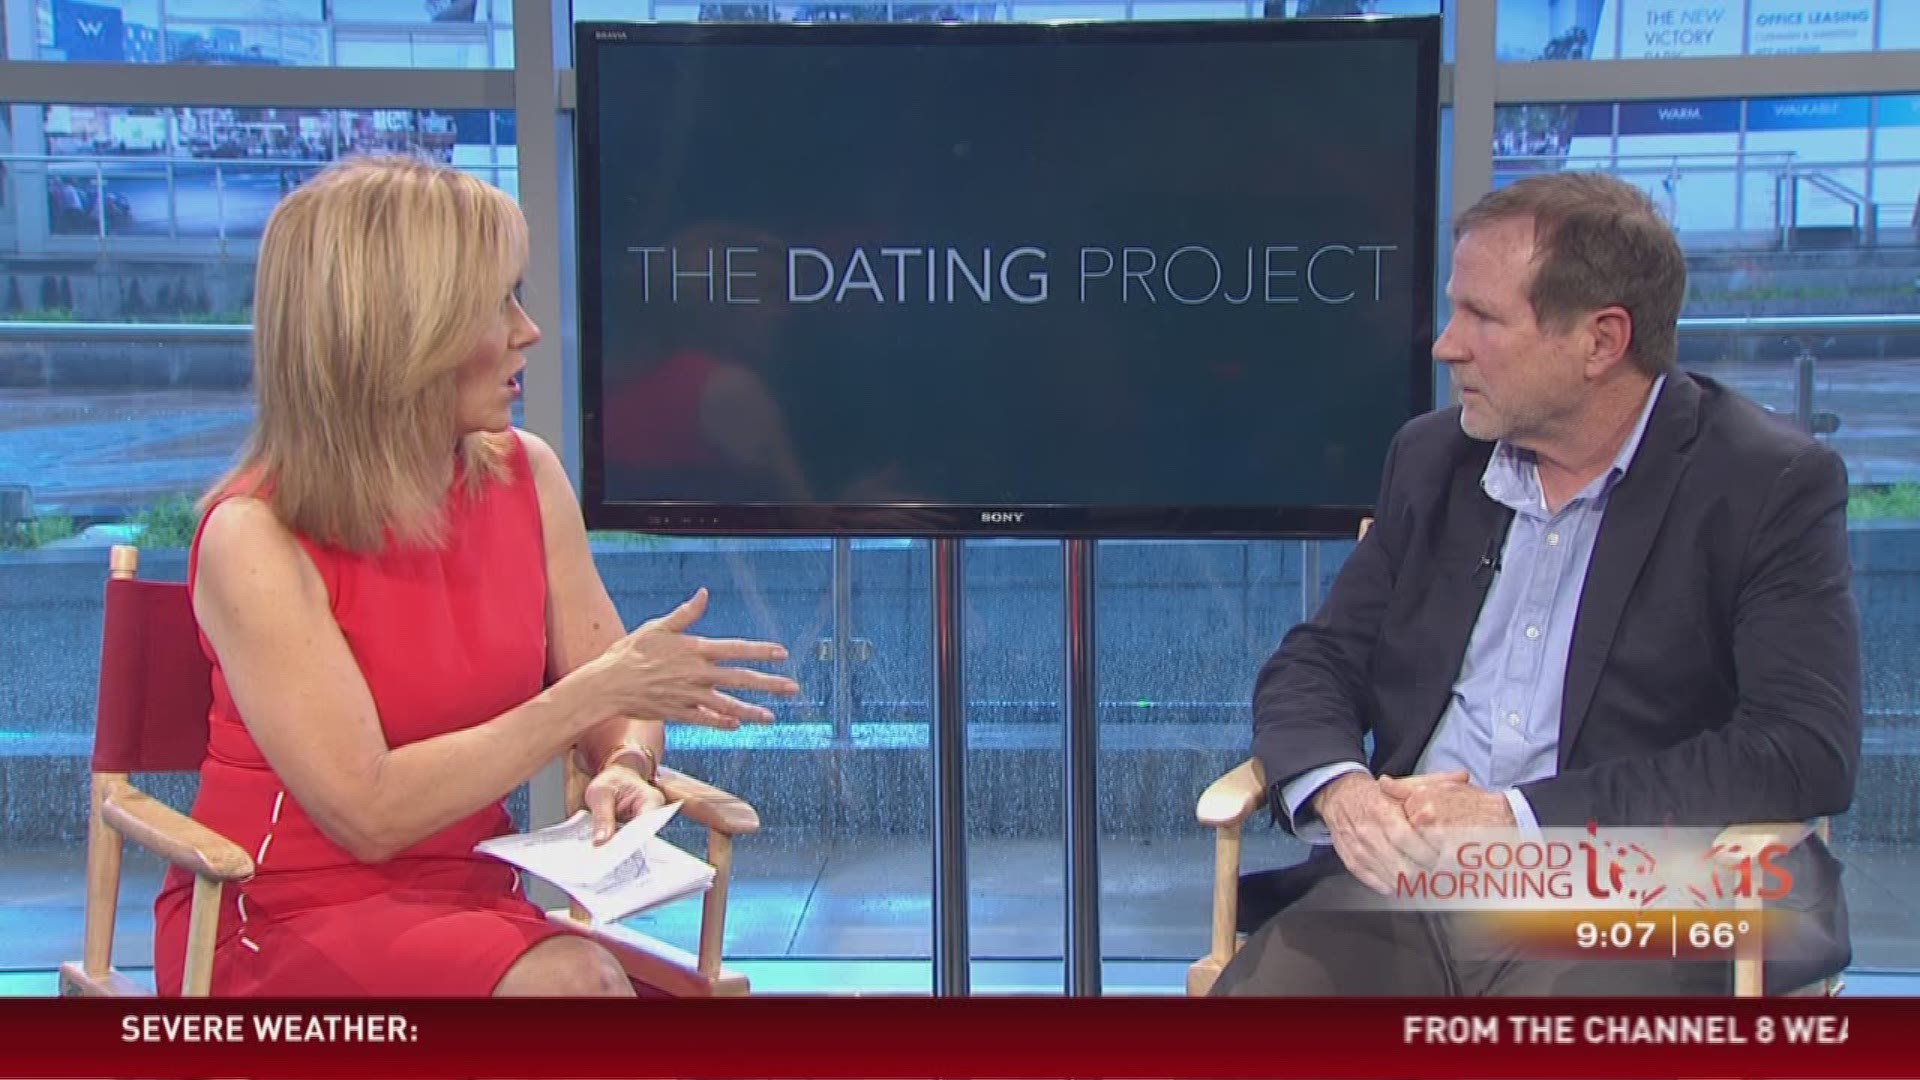 Oscar-winning film maker, Chris Donahue returns to North Texas to screen his new movie "The Dating Project".